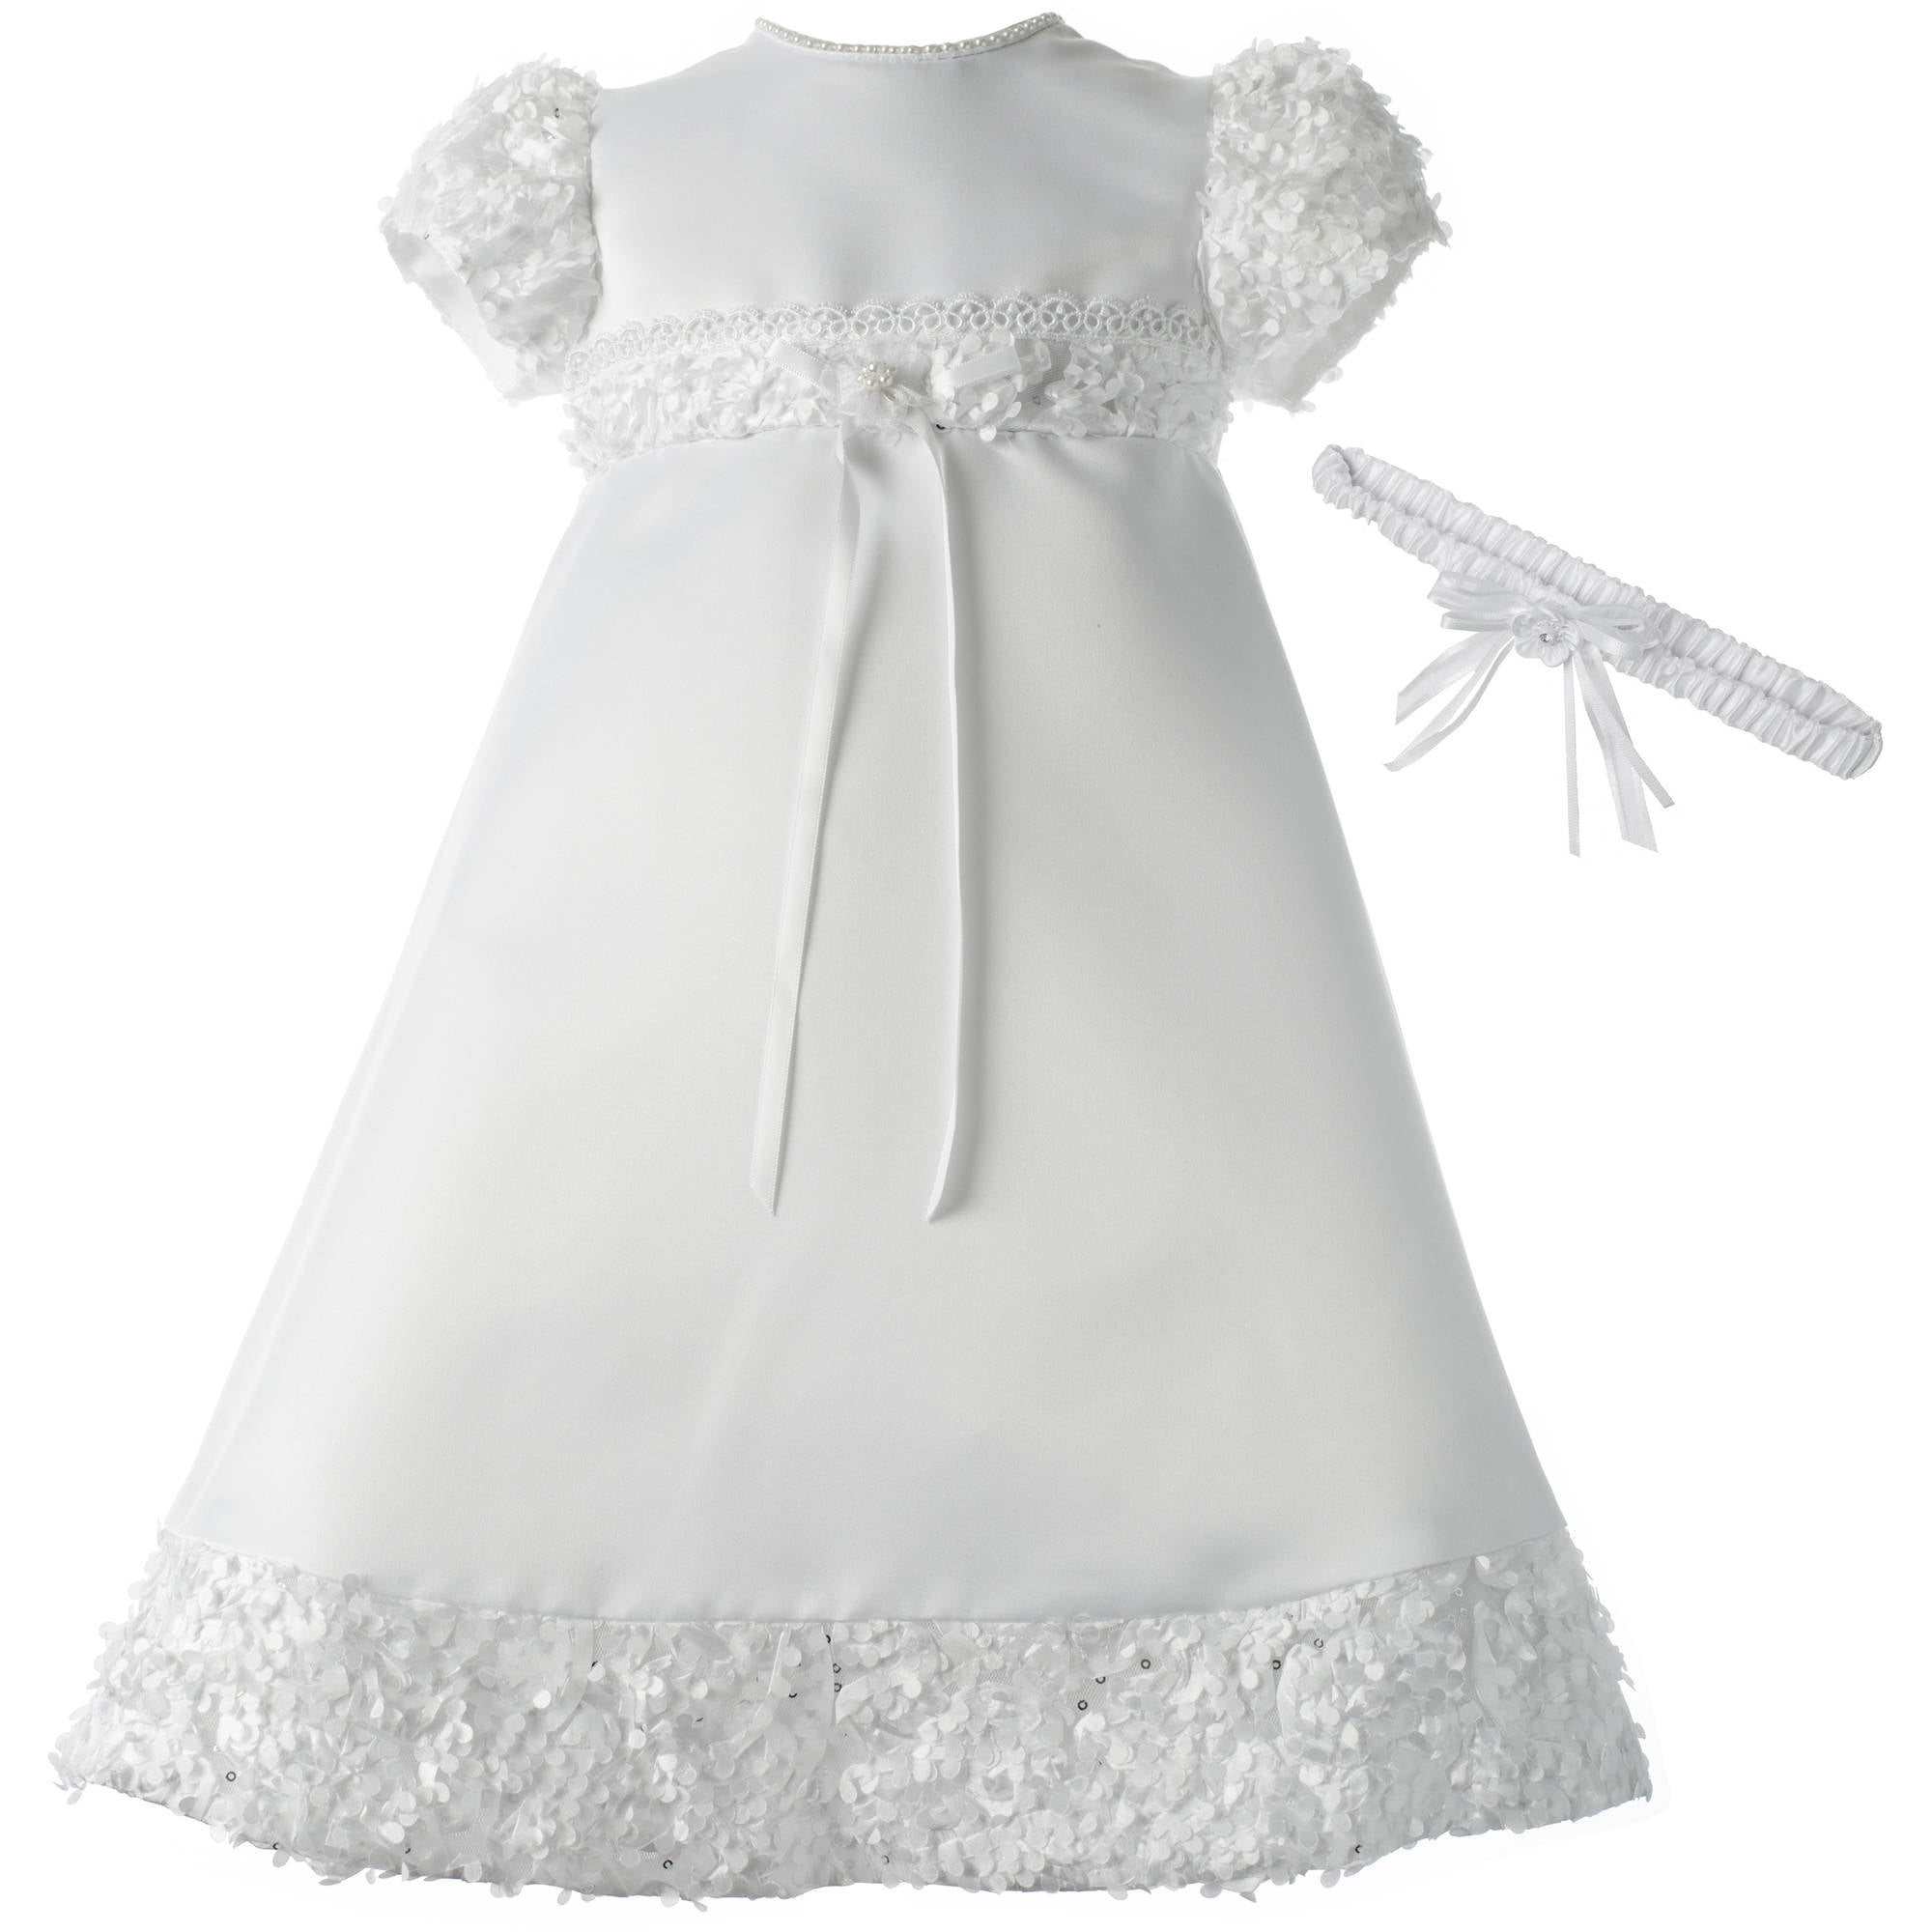 Coozy Baby Girls Baptism Dress Party Wedding Christening Special Occasions Gown with Headband